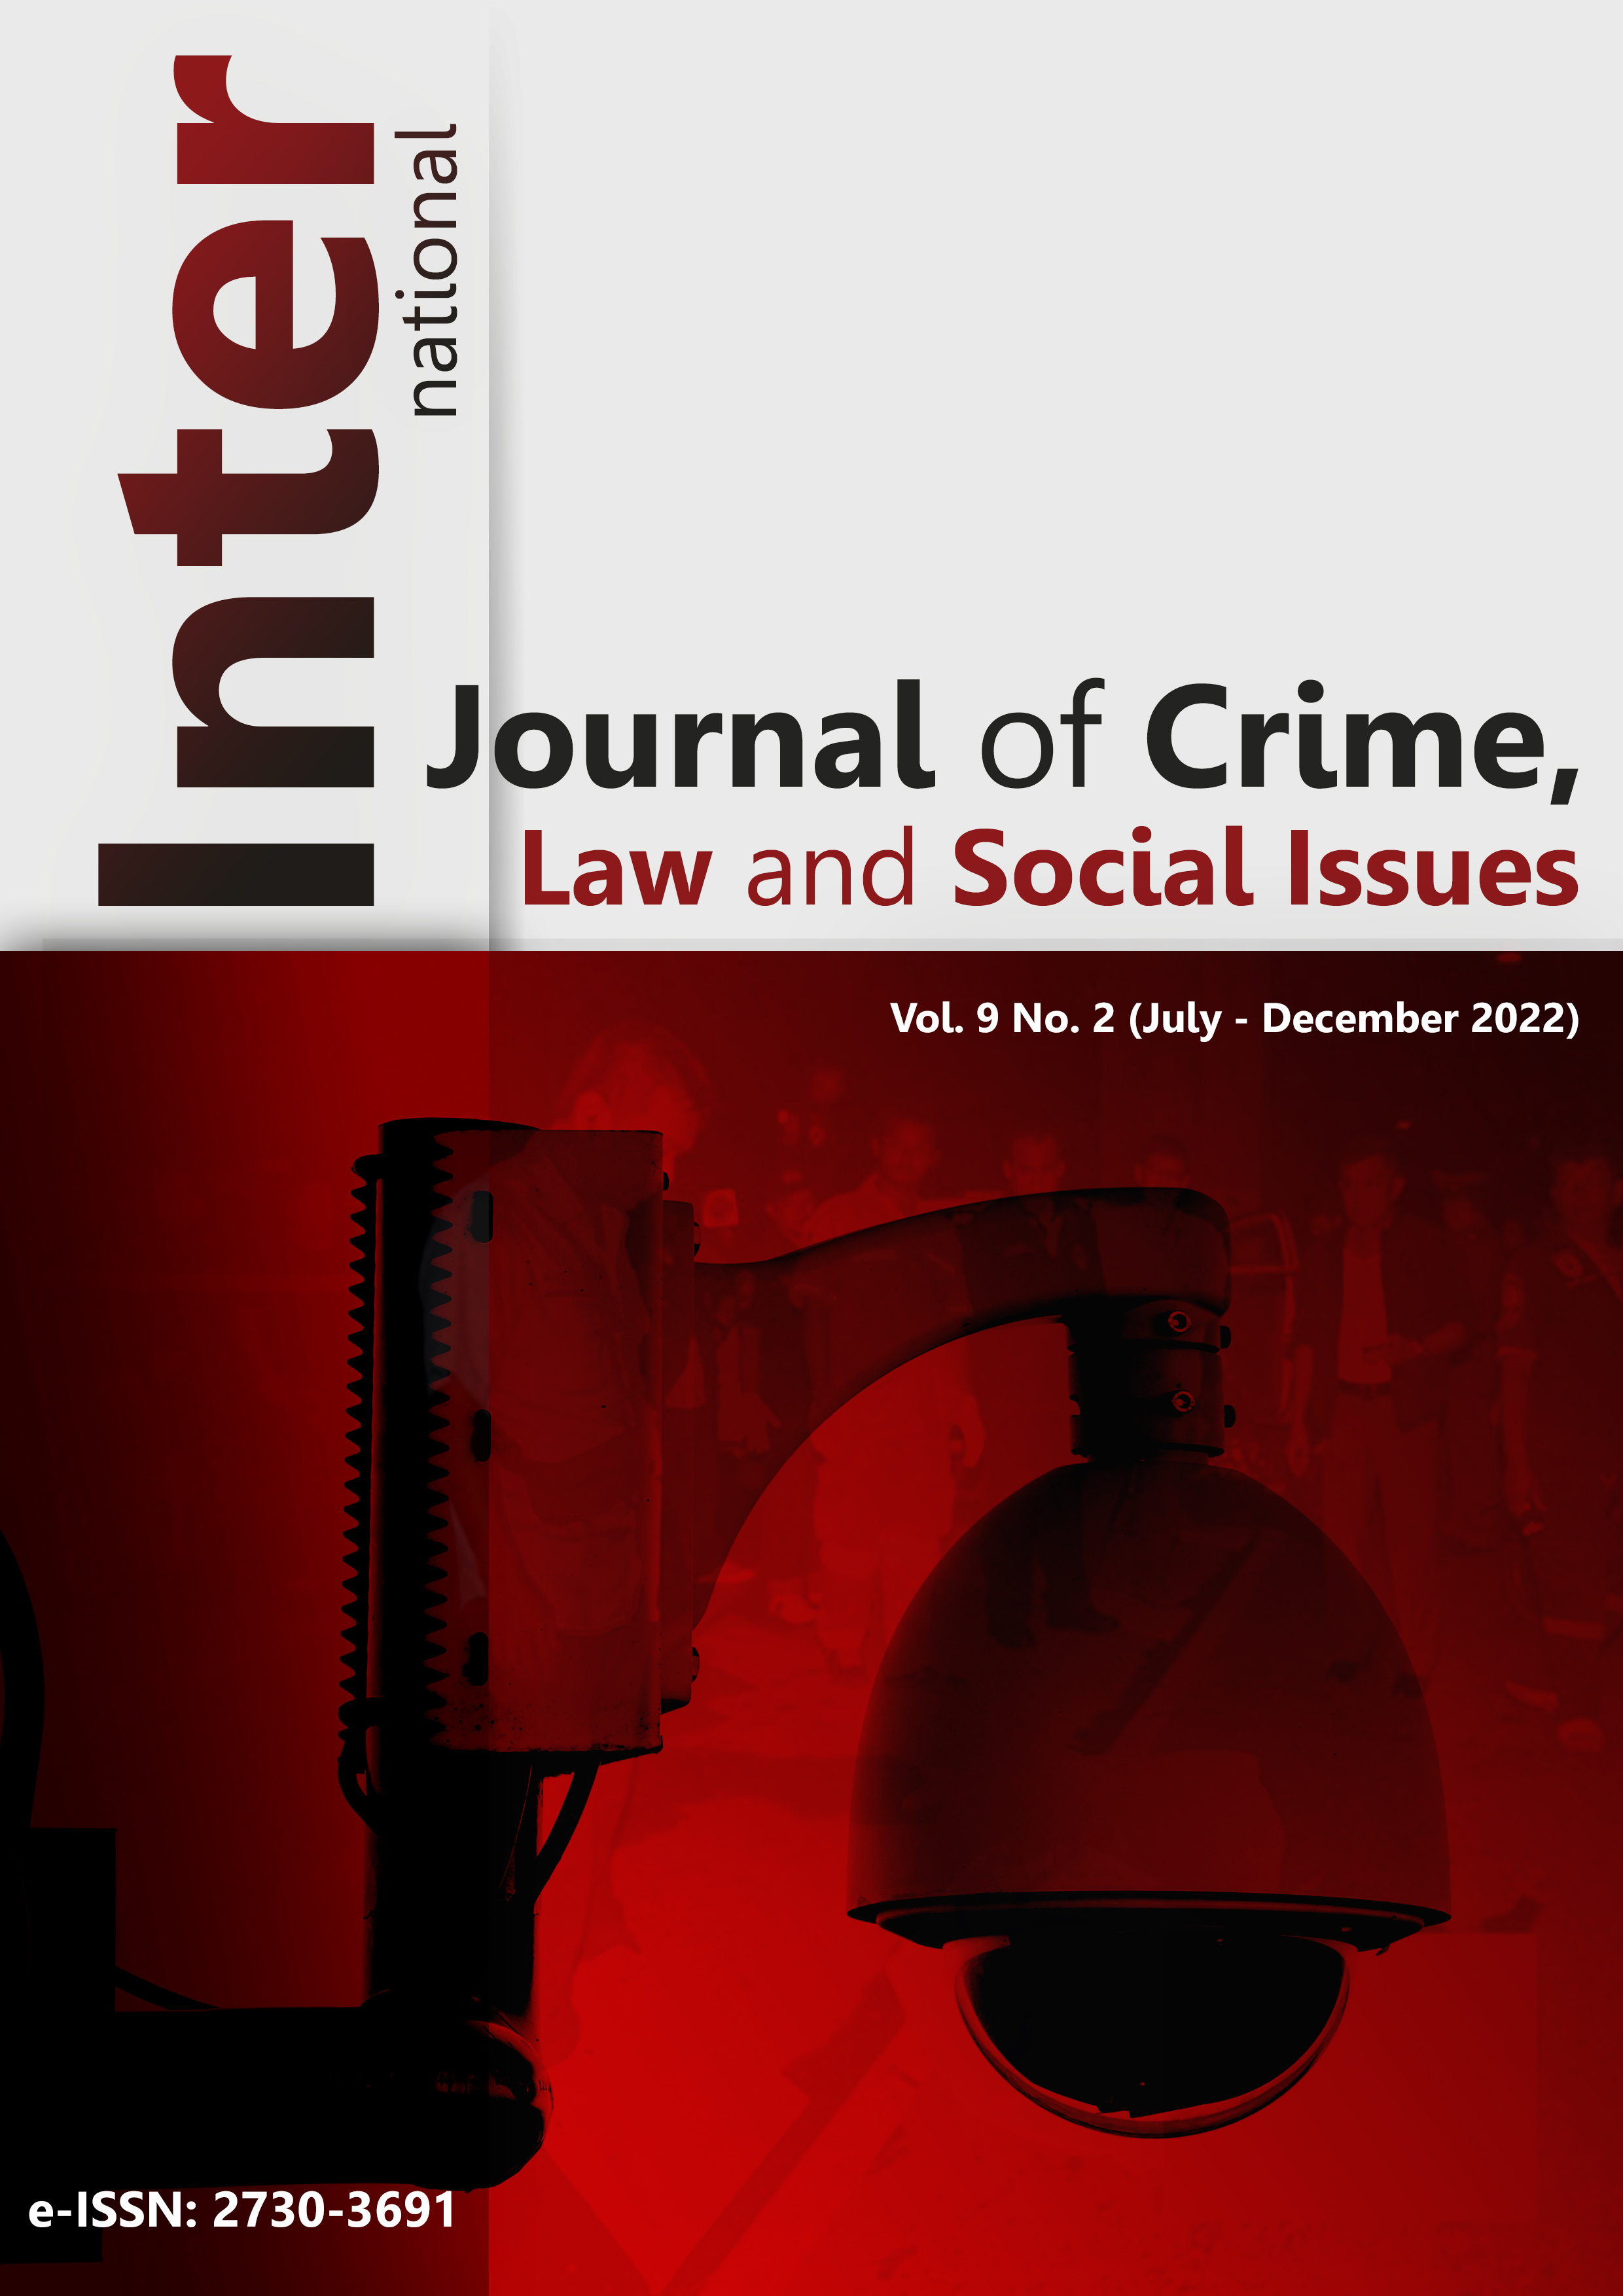 					View Vol. 9 No. 2 (2022): International Journal of Crime, Law and Social Issues
				